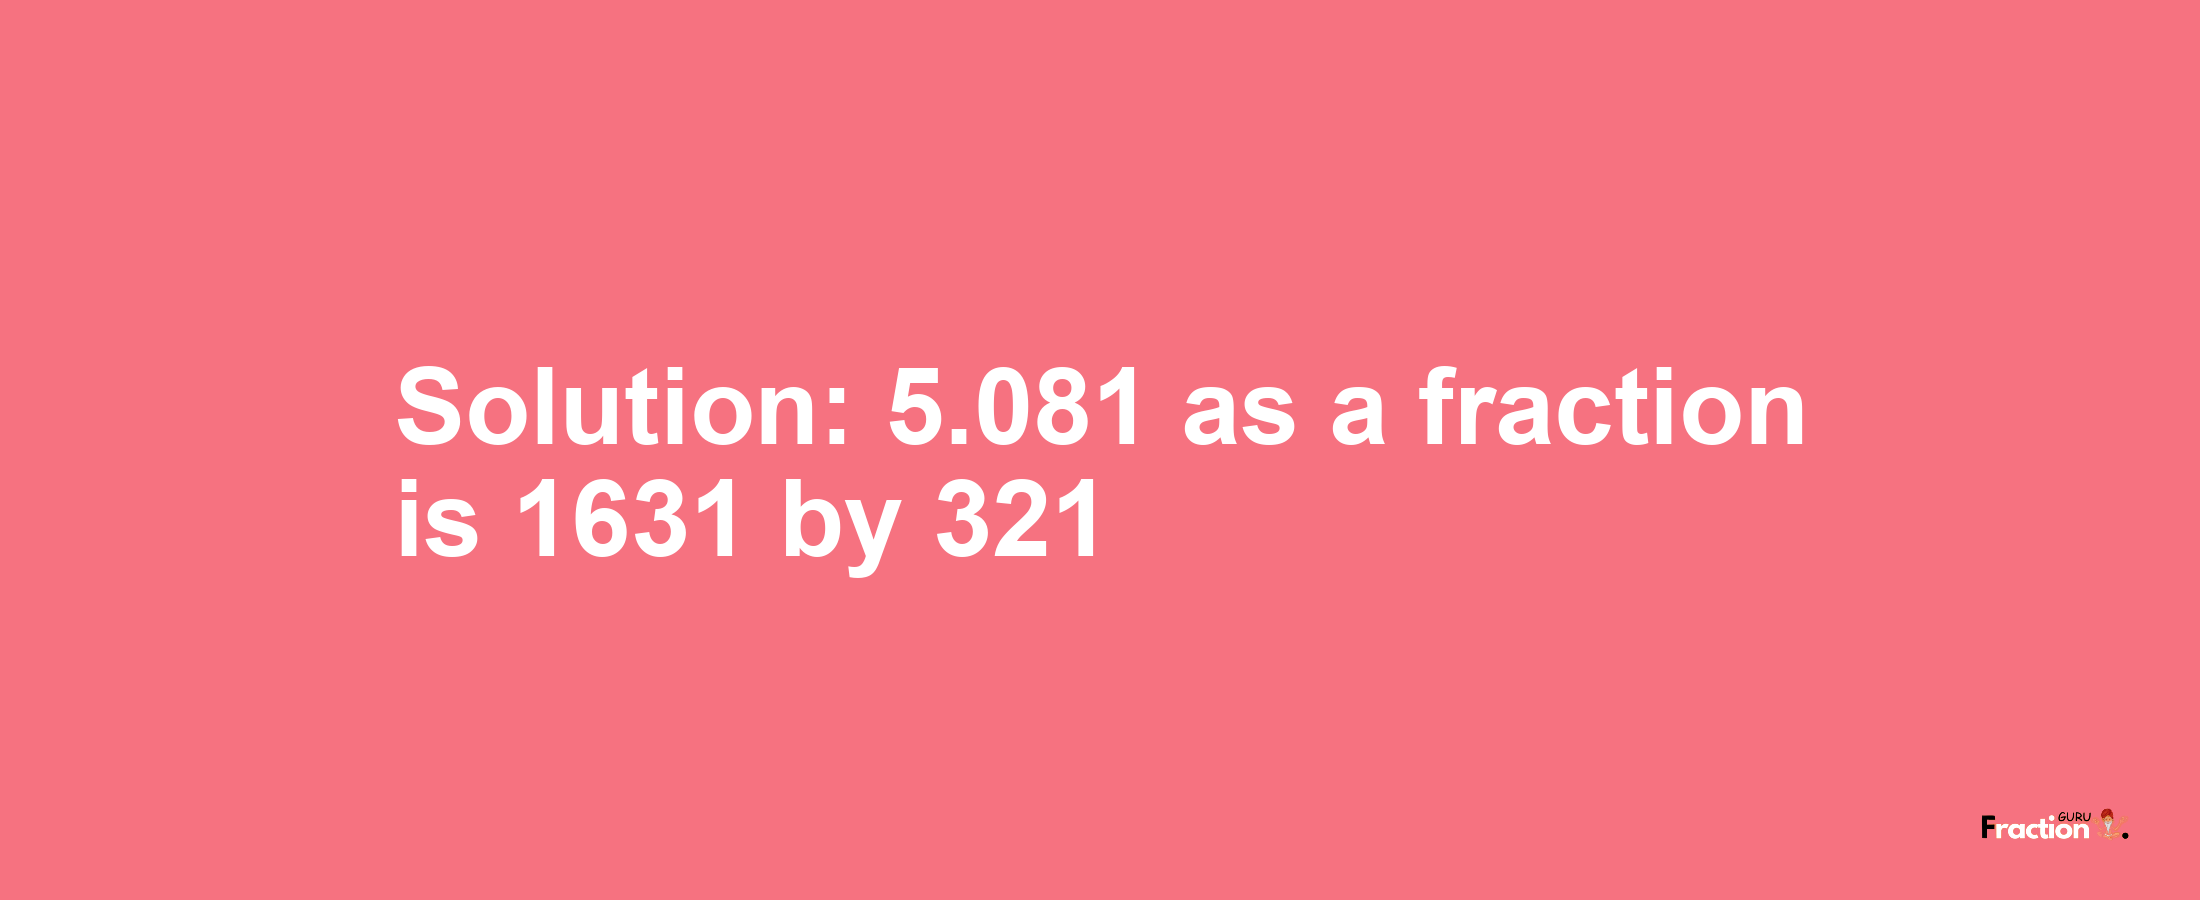 Solution:5.081 as a fraction is 1631/321